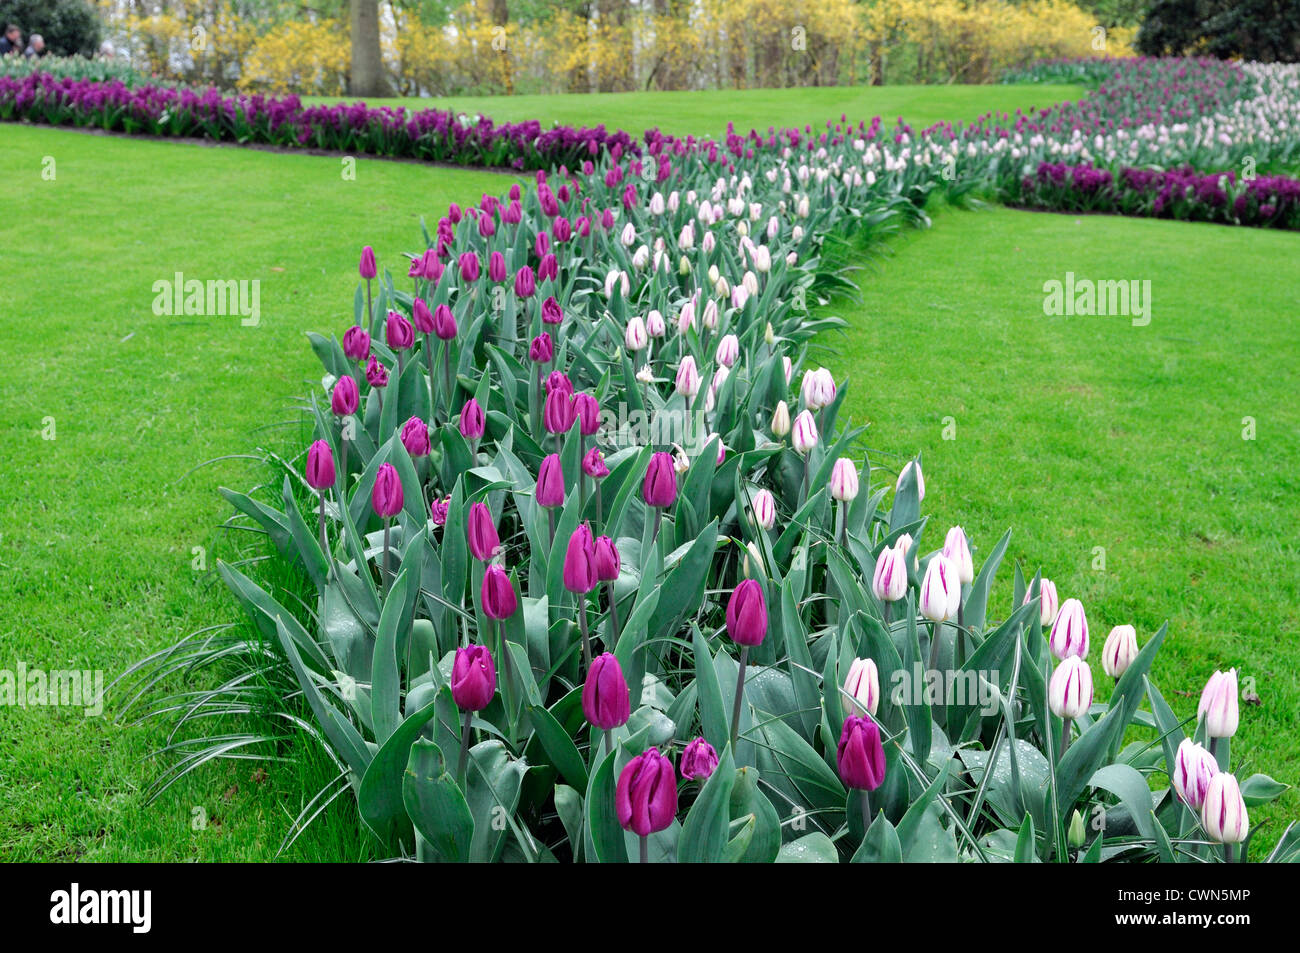 Tulipa flaming flag purple flag triumph tulip flowers display spring flower  bloom blossom bed colour color bulb combo mix mixed Stock Photo - Alamy